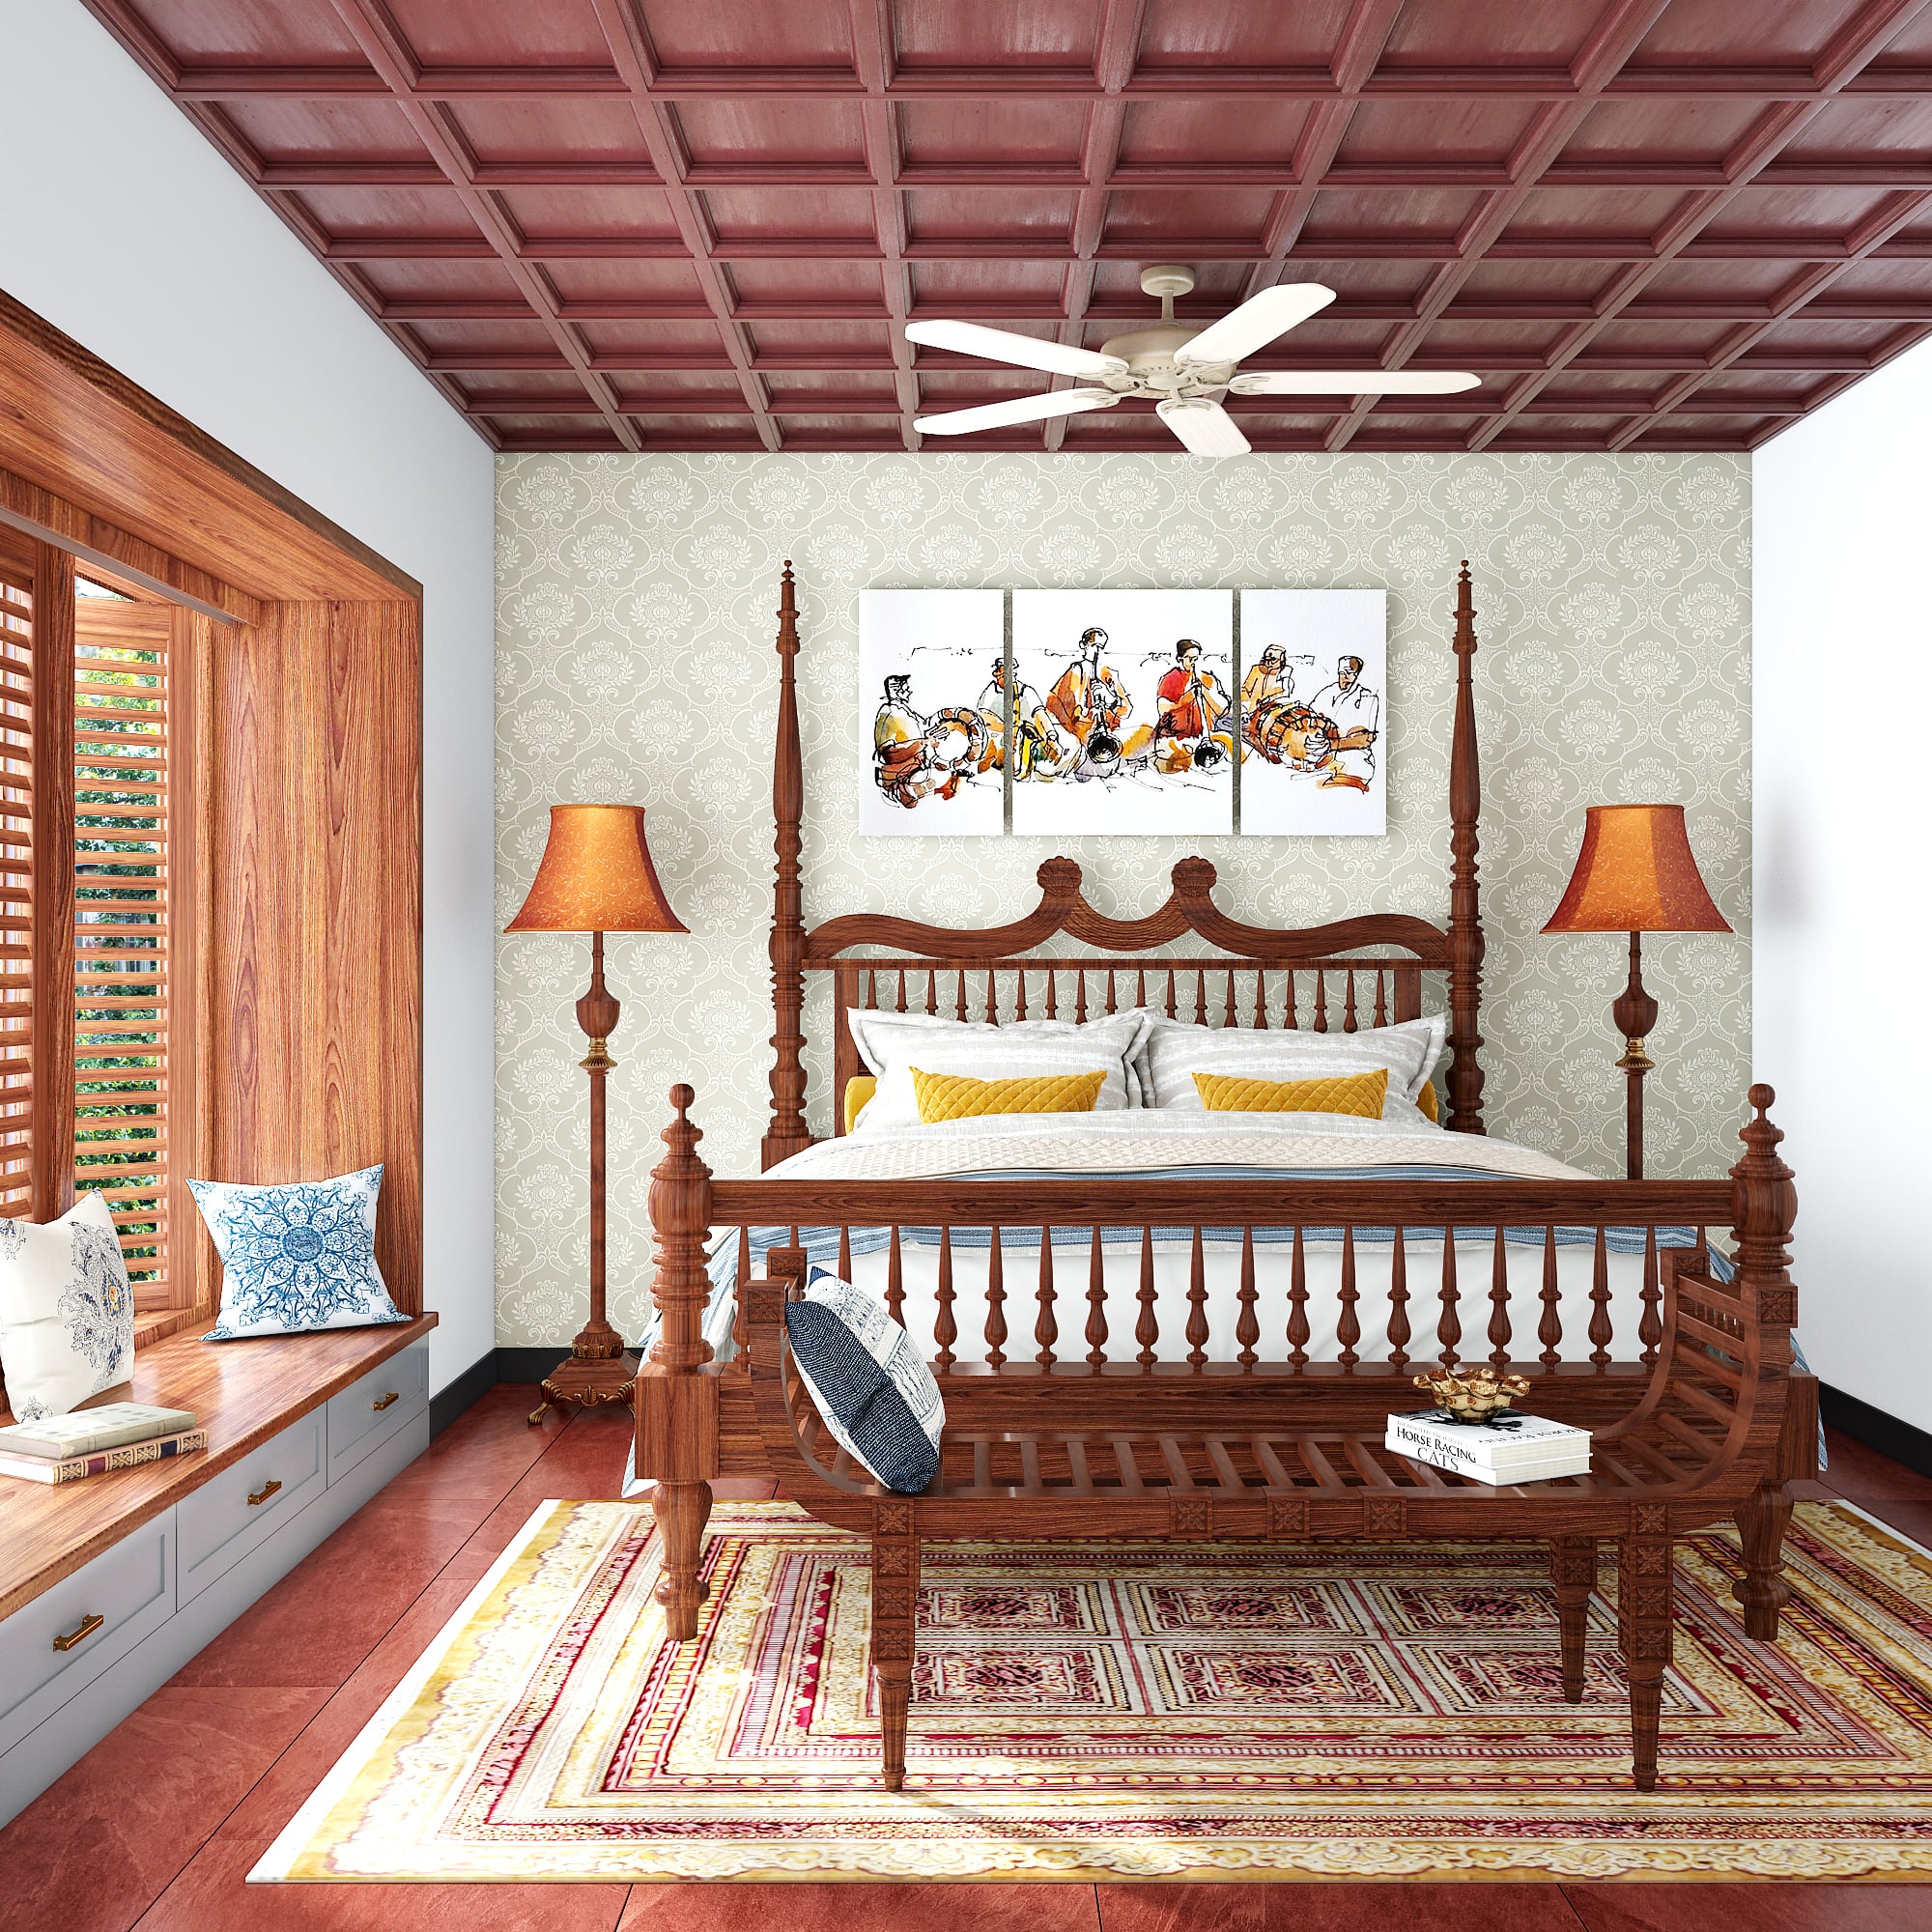 Bedroom designers in Chennai created a bedroom with bay window storage bench